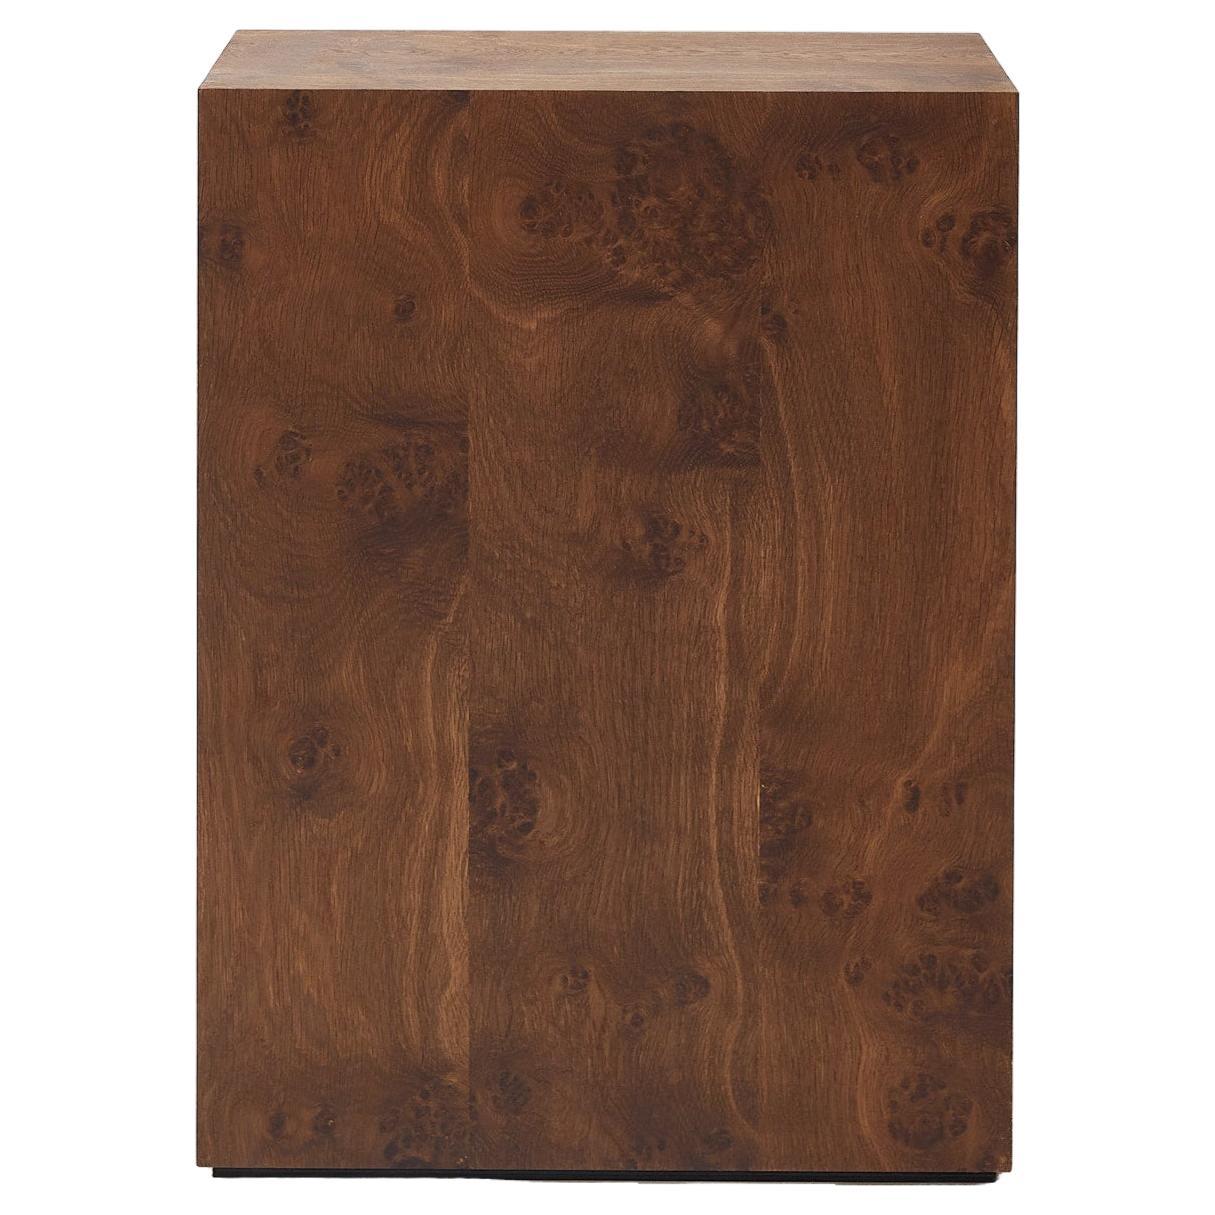 Square wooden pedestal stand in smoked oak For Sale